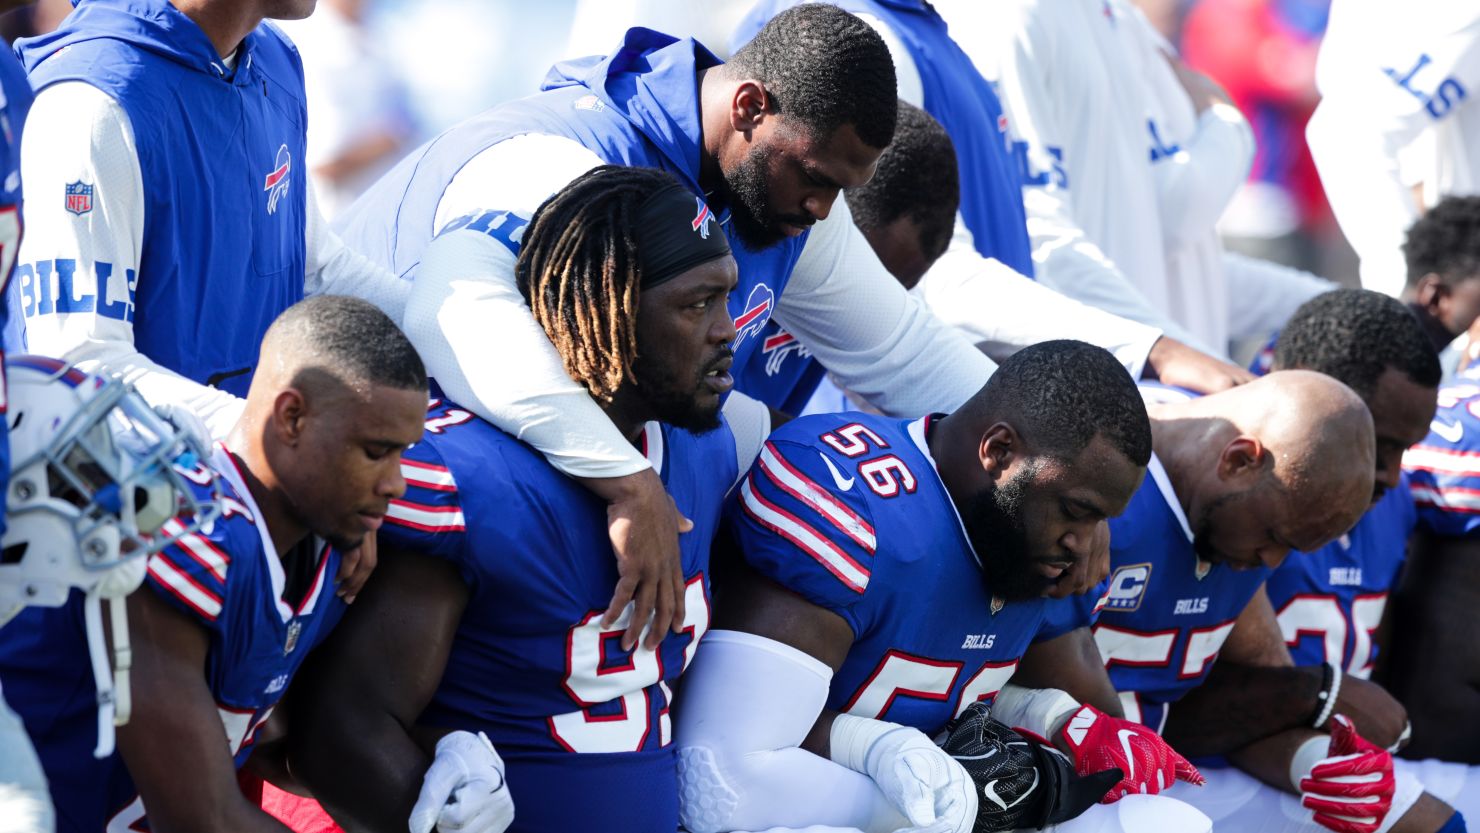 Buffalo Bills players kneel during the American national anthem before an NFL game on Sunday.